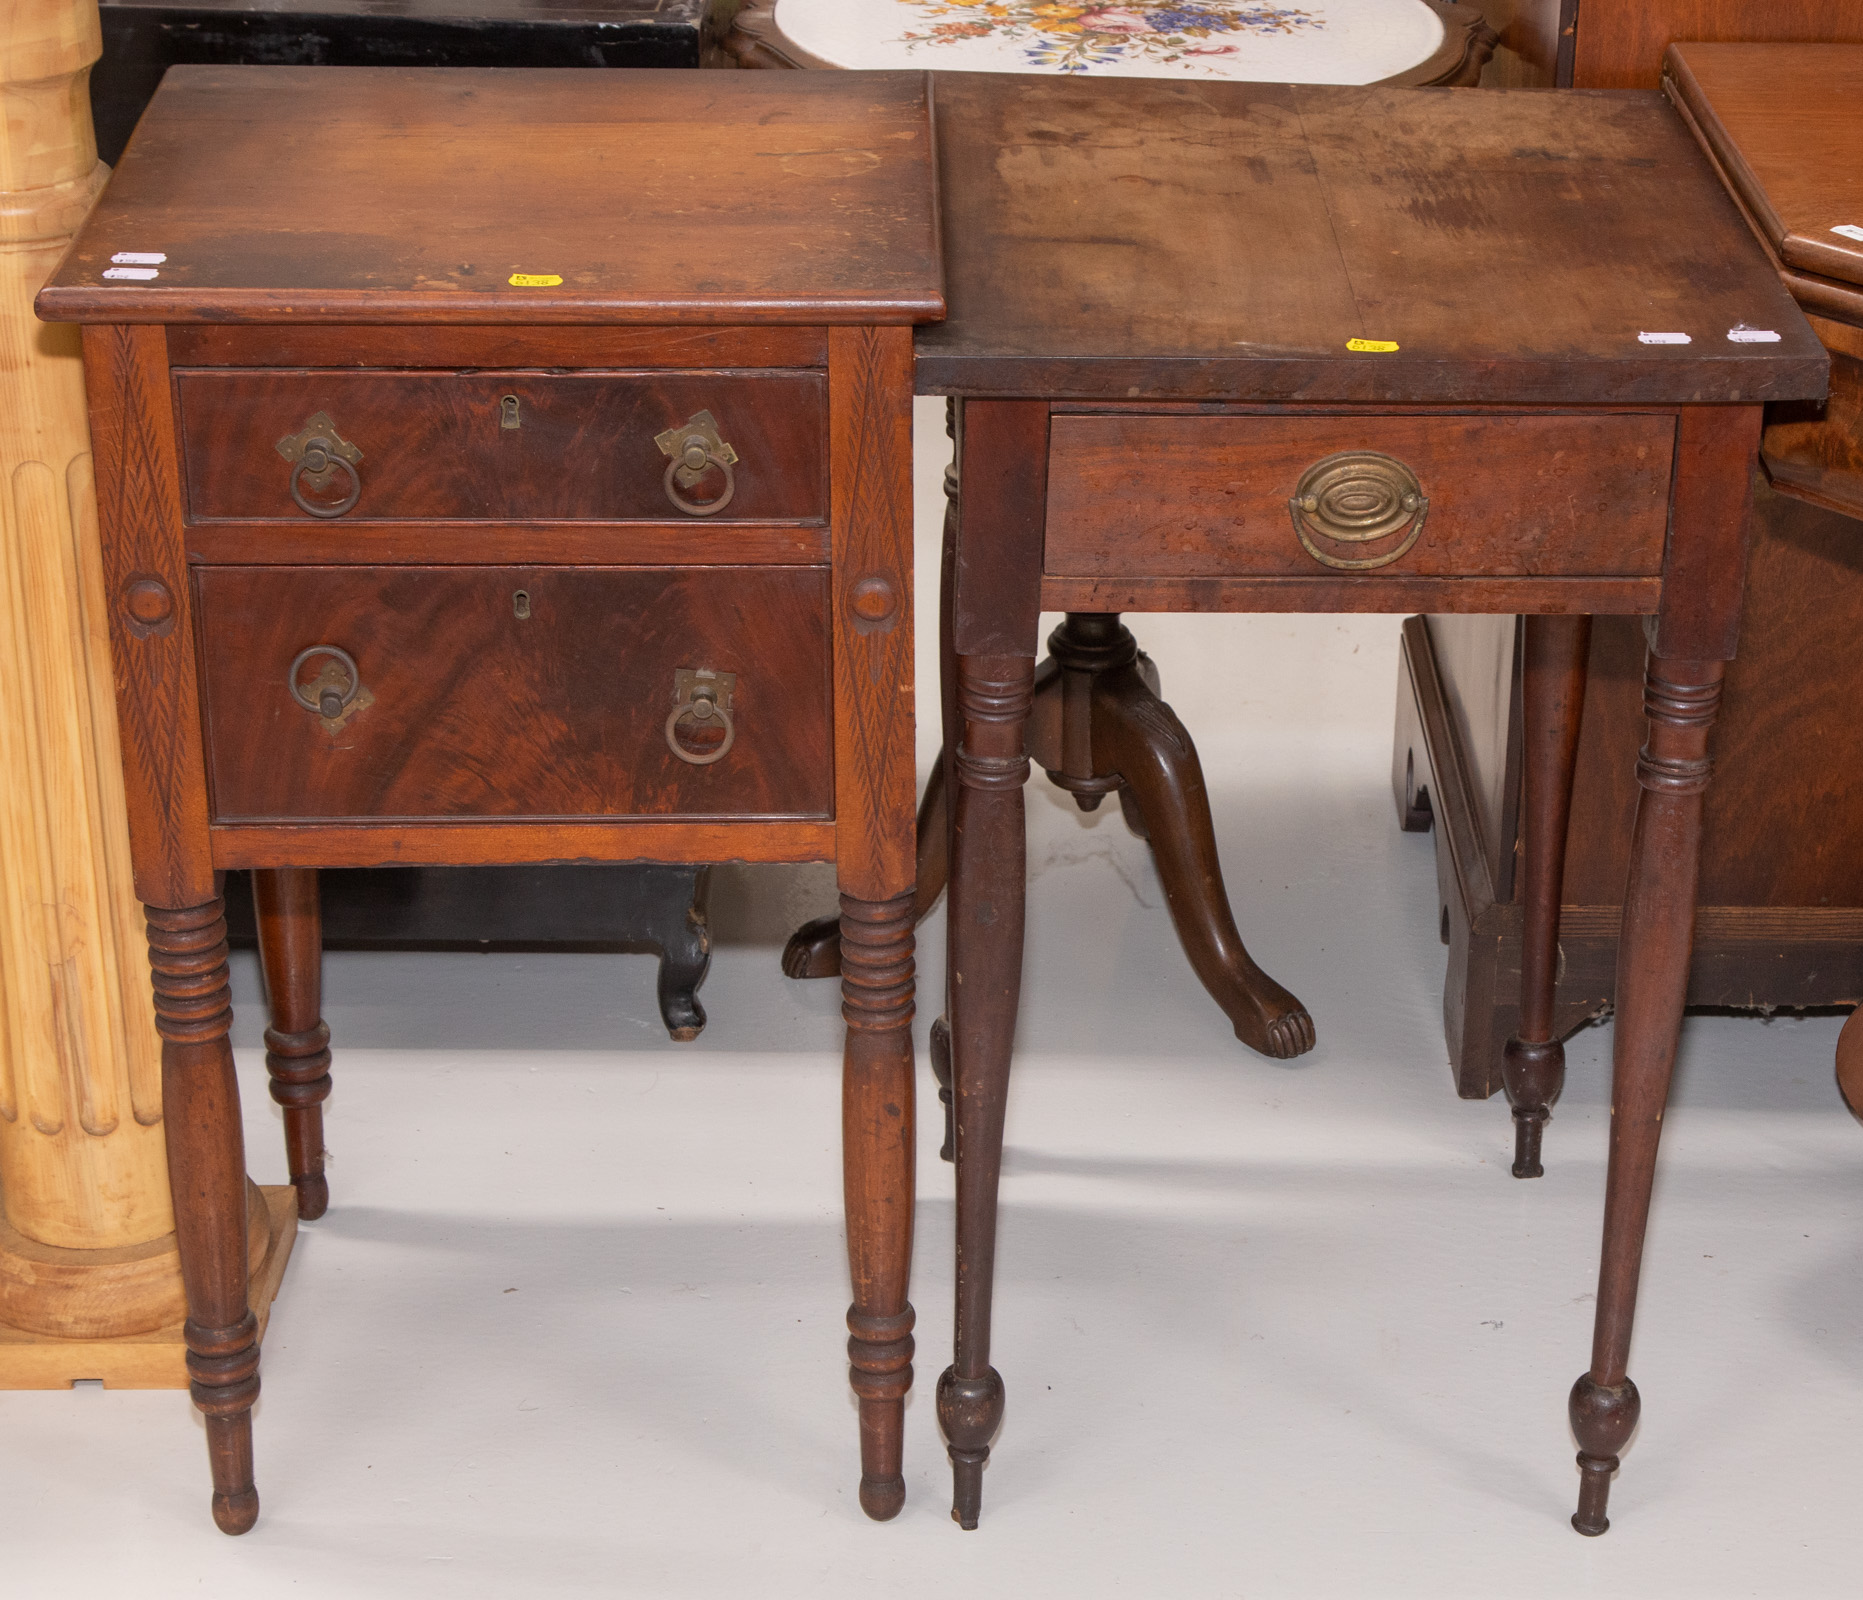 TWO ANTIQUE STANDS Includes a country